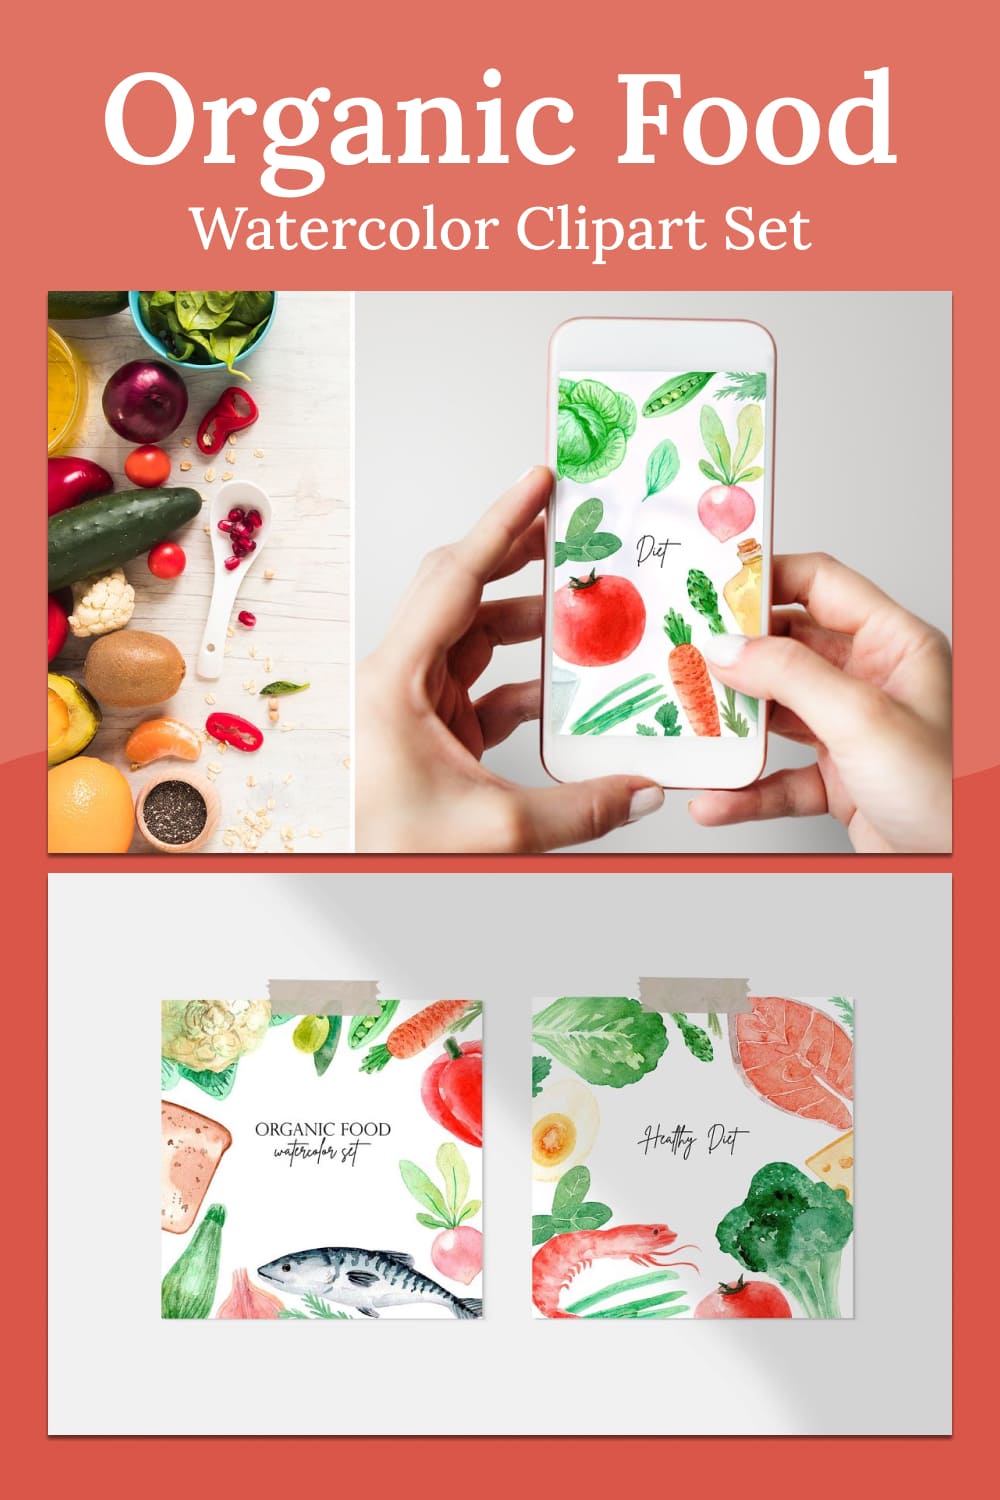 Organic food. watercolor clipart set - pinterest image preview.